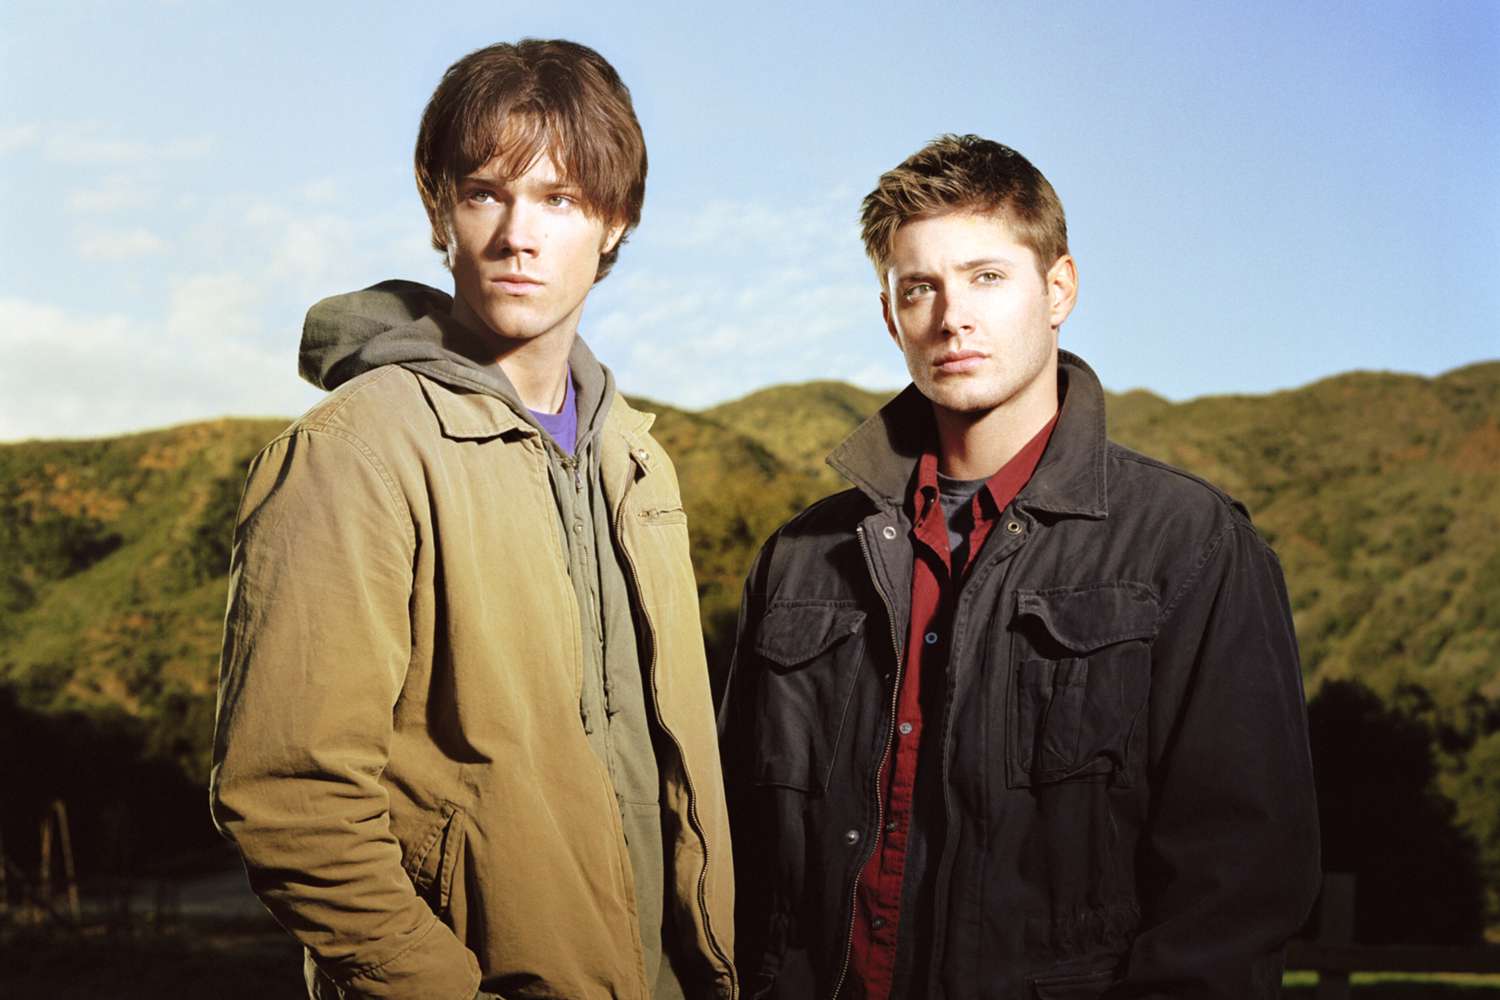 The Cast of “Supernatural”: Where Are They Now?